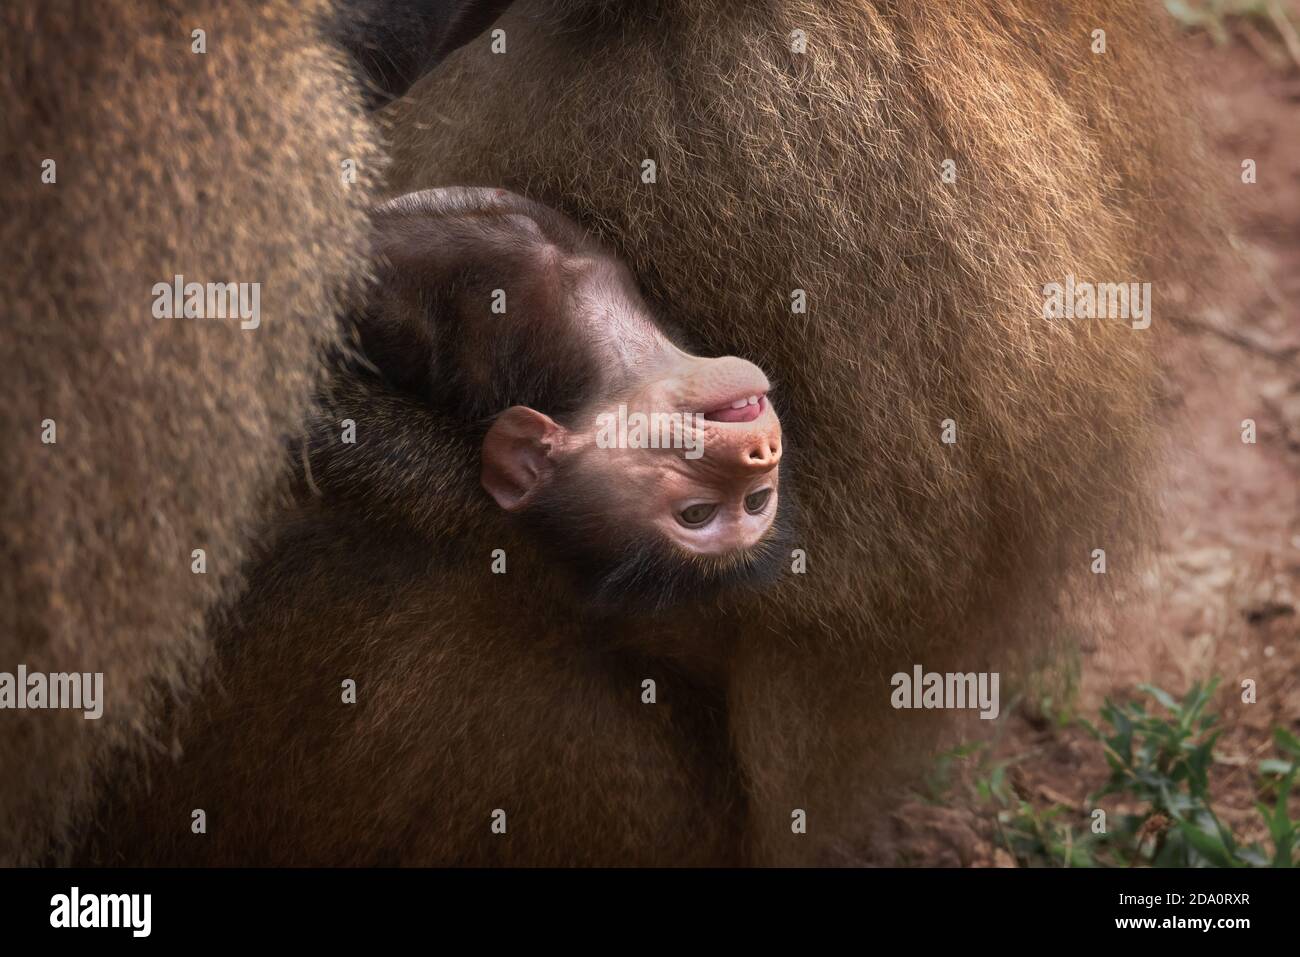 Funny Baby Monkey Having Fun While Lying On Belly Of Fluffy Female Animal In Natural Habitat Stock Photo Alamy